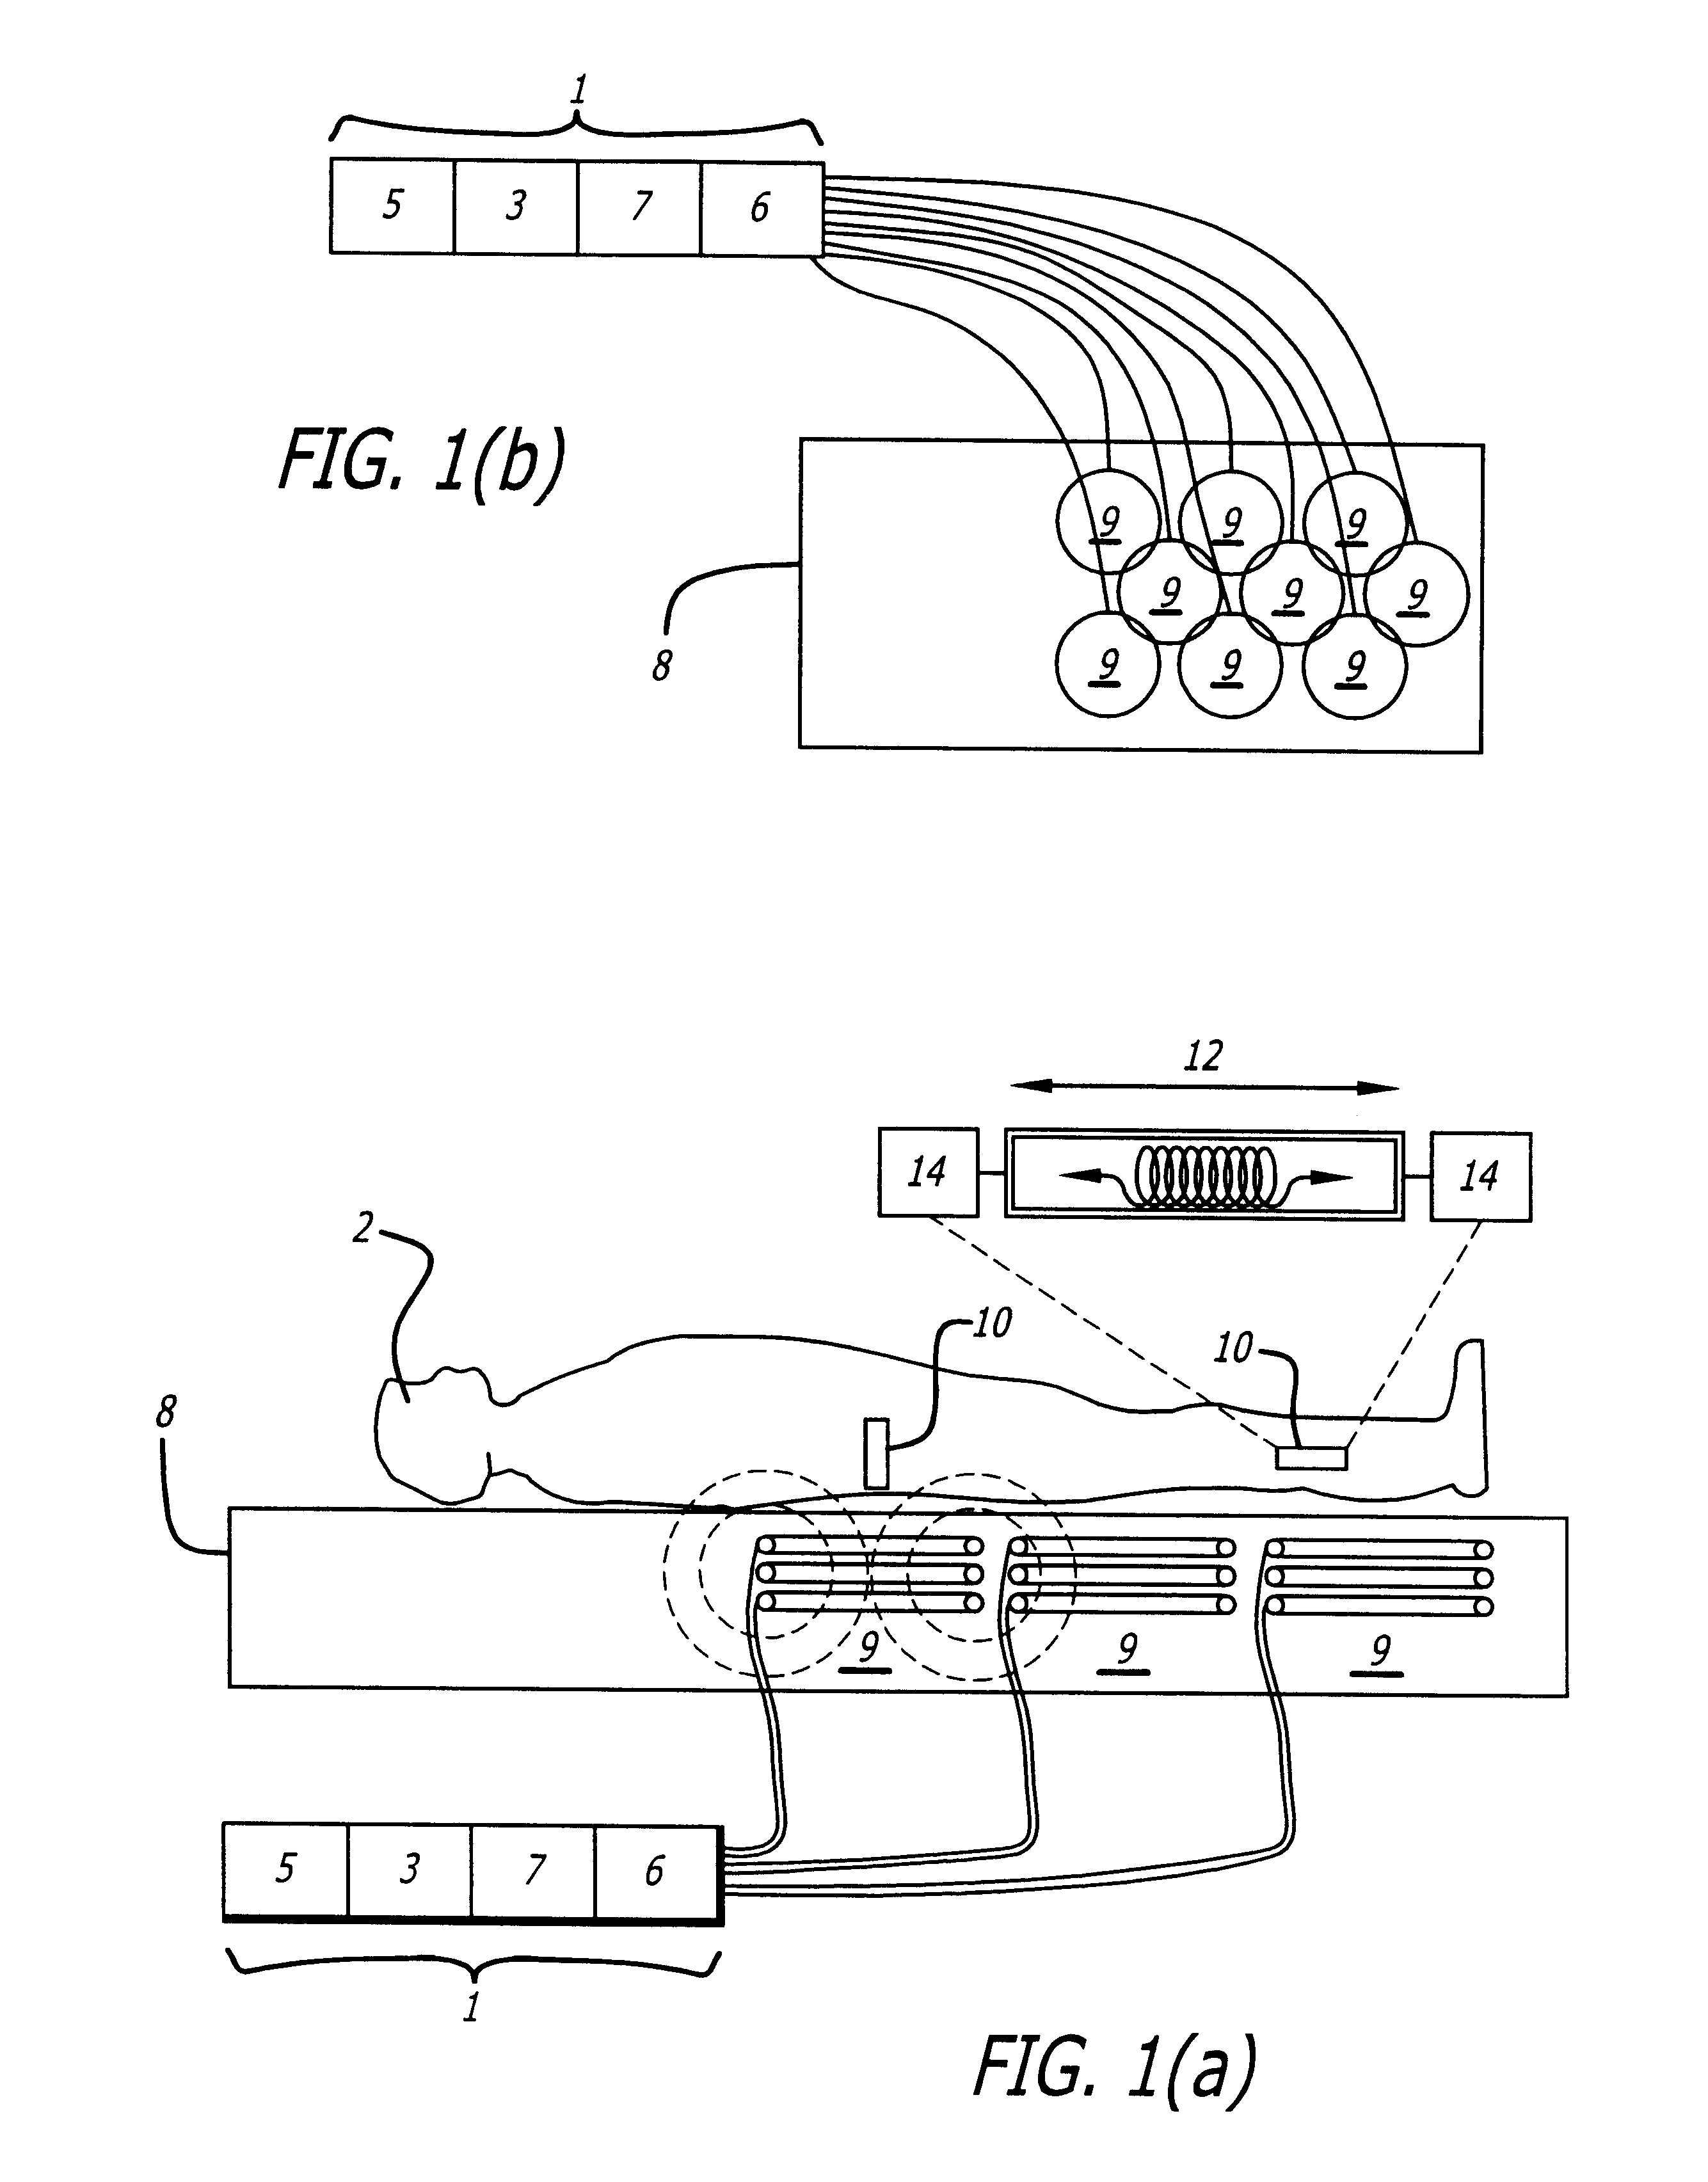 Method and apparatus for conditioning muscles during sleep